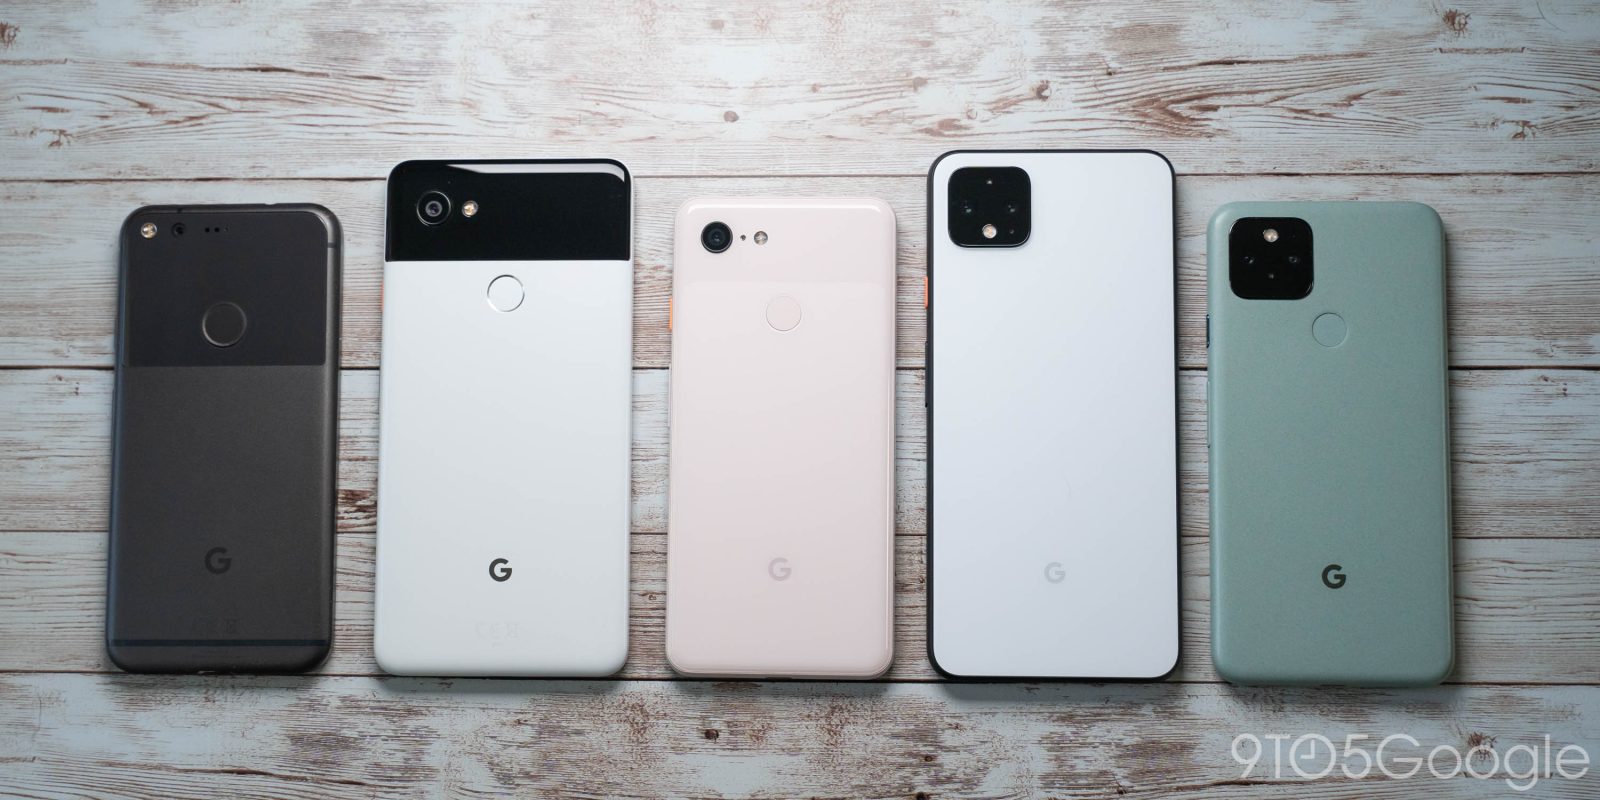 Pixel 1, 2 XL, 3, 4 XL, and 5